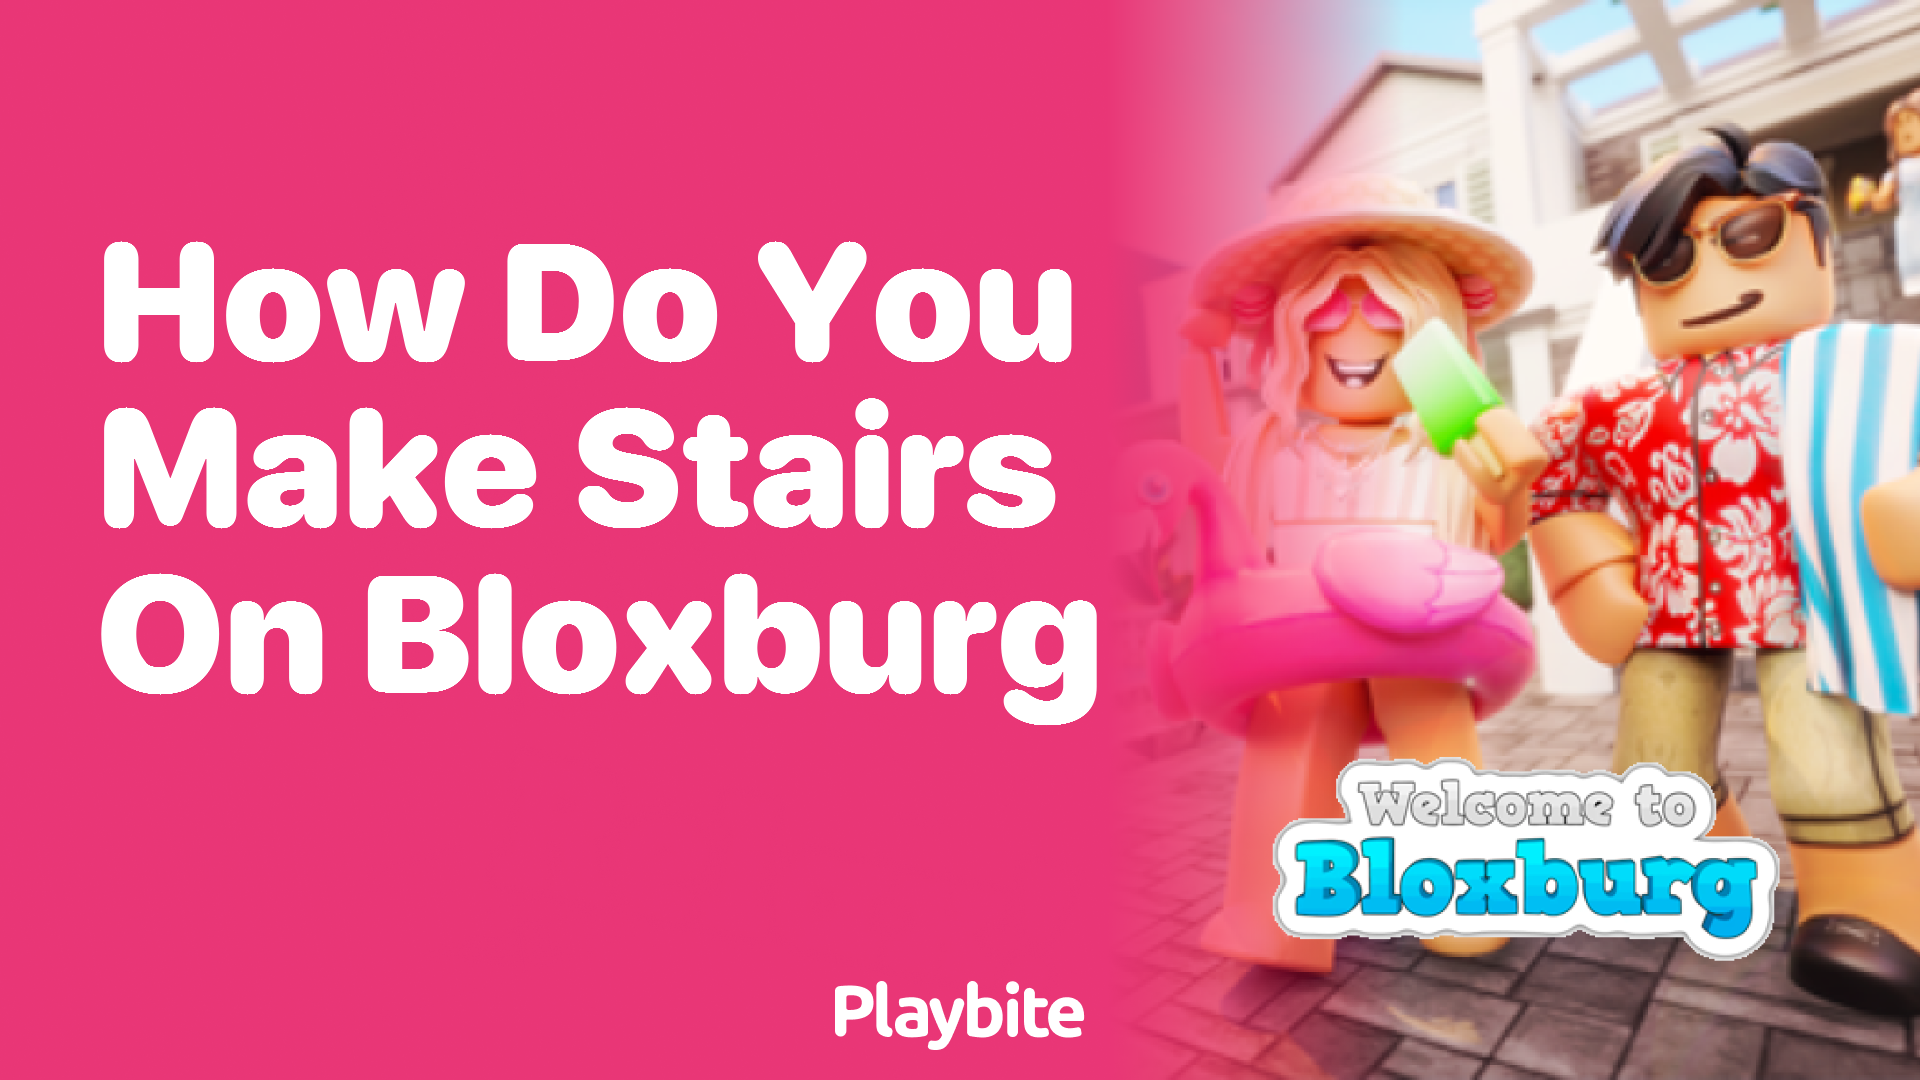 How Do You Make Stairs on Bloxburg?